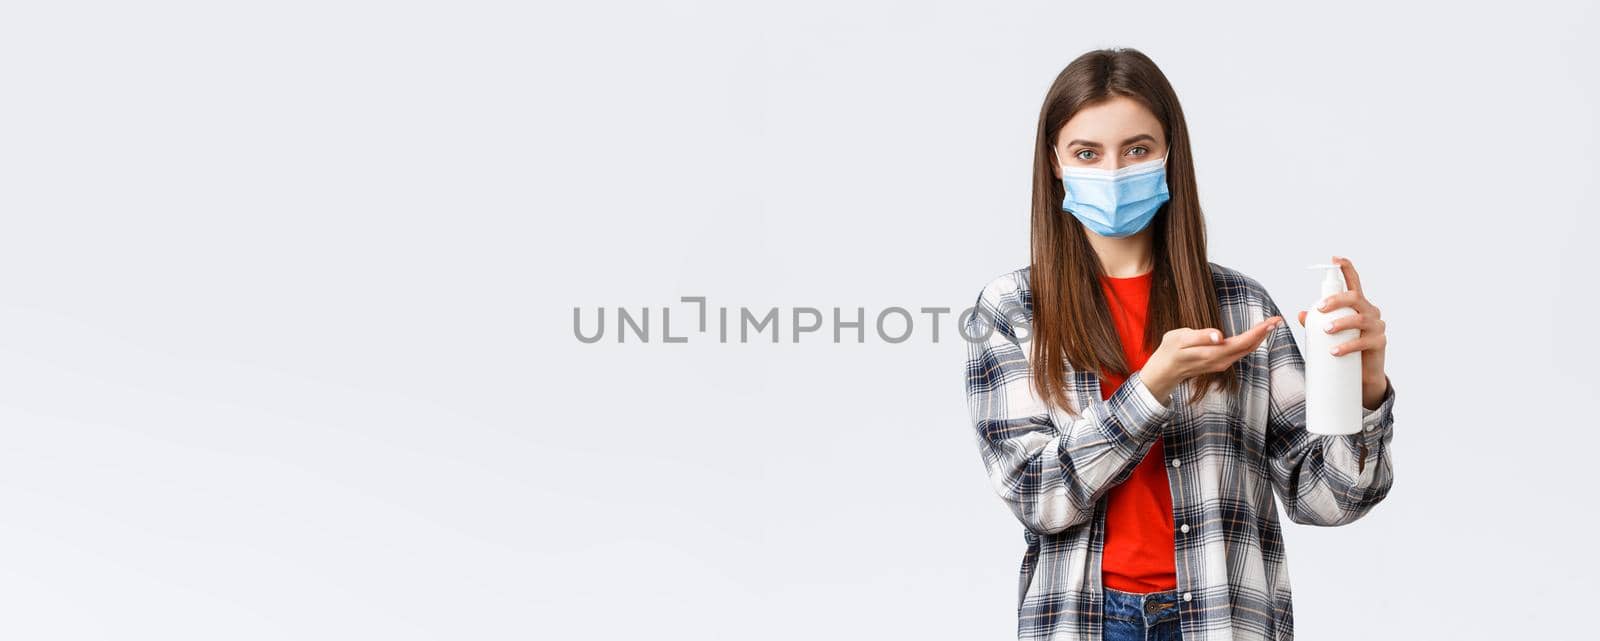 Coronavirus outbreak, leisure on quarantine, social distancing and emotions concept. Young woman taking care of health, preventing virus measures, apply soap or hand sanitizer, wear medical mask.